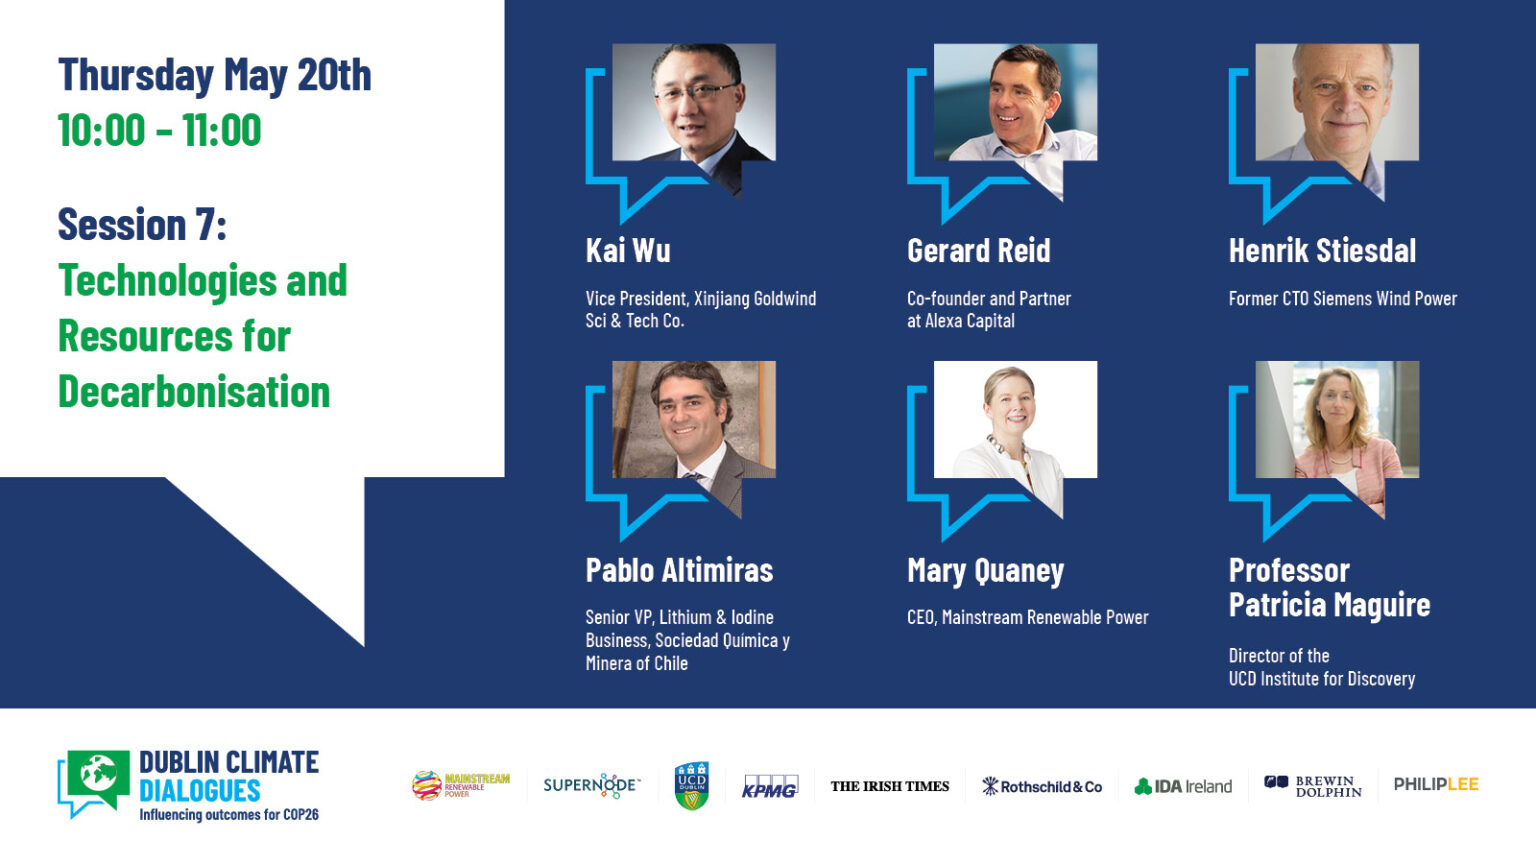 an image showing the speakers from the Dublin dialogue event